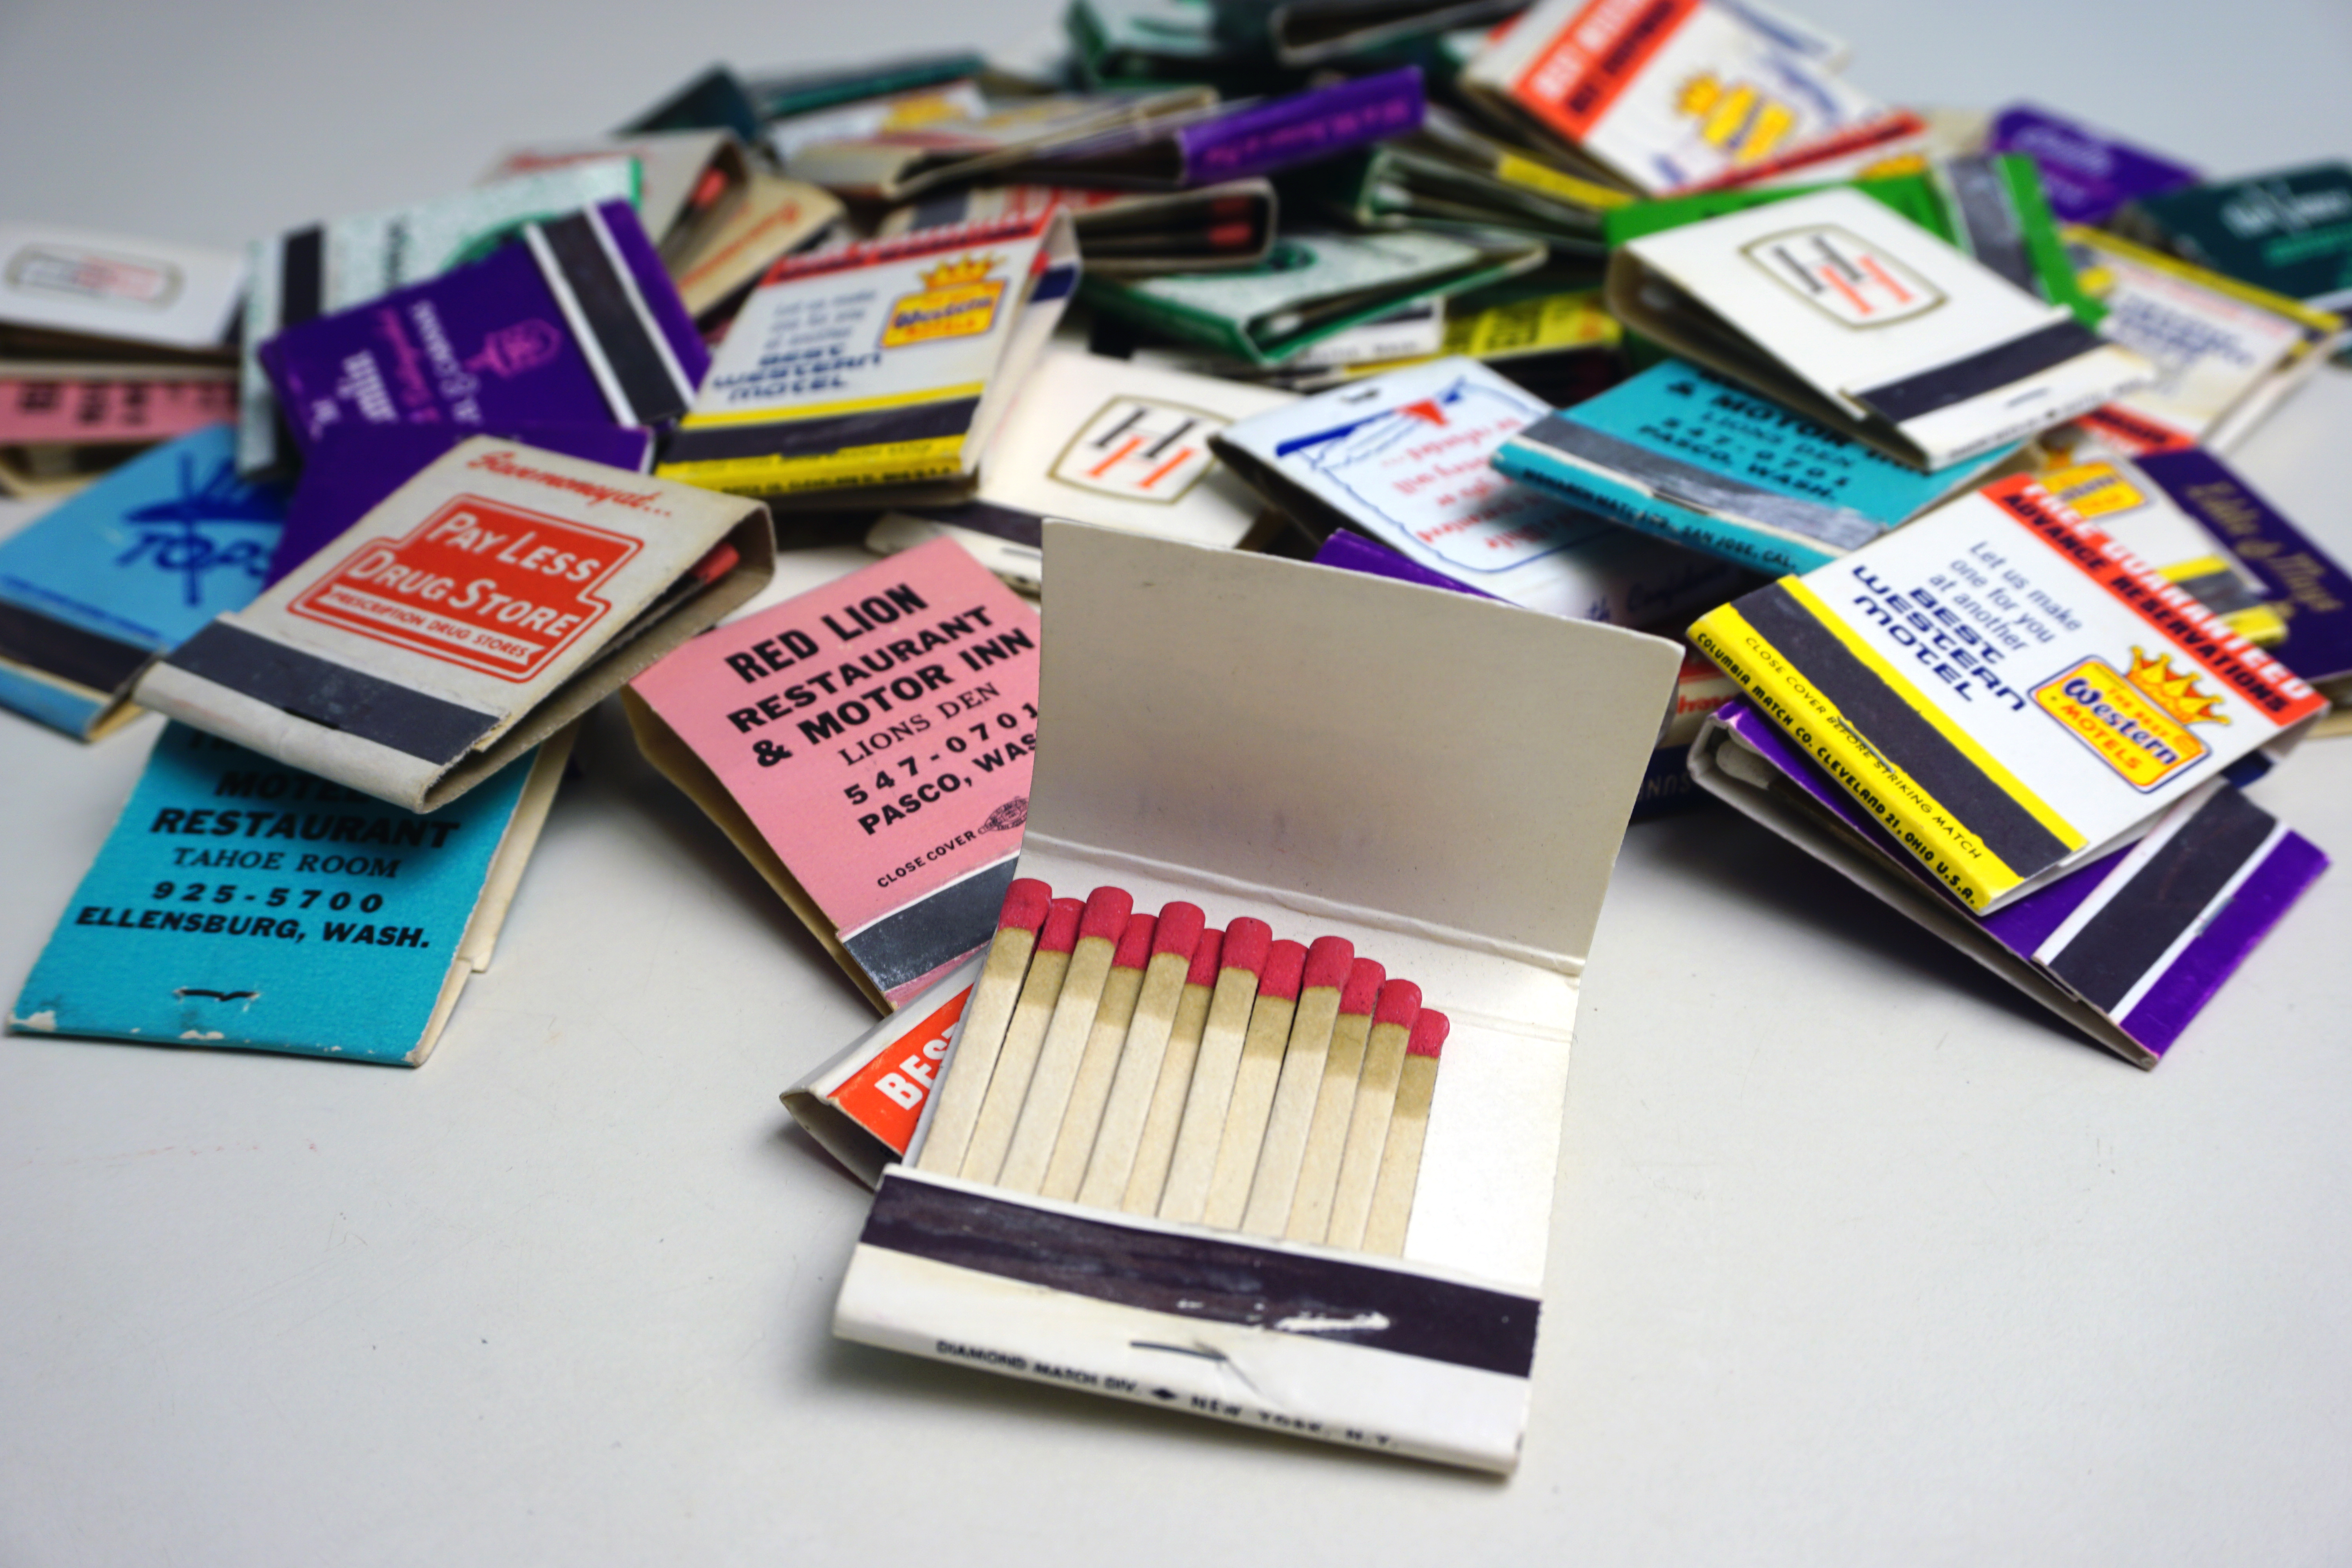 a pile of colorful vintage matchbooks from restaurants, hotels, and other businesses